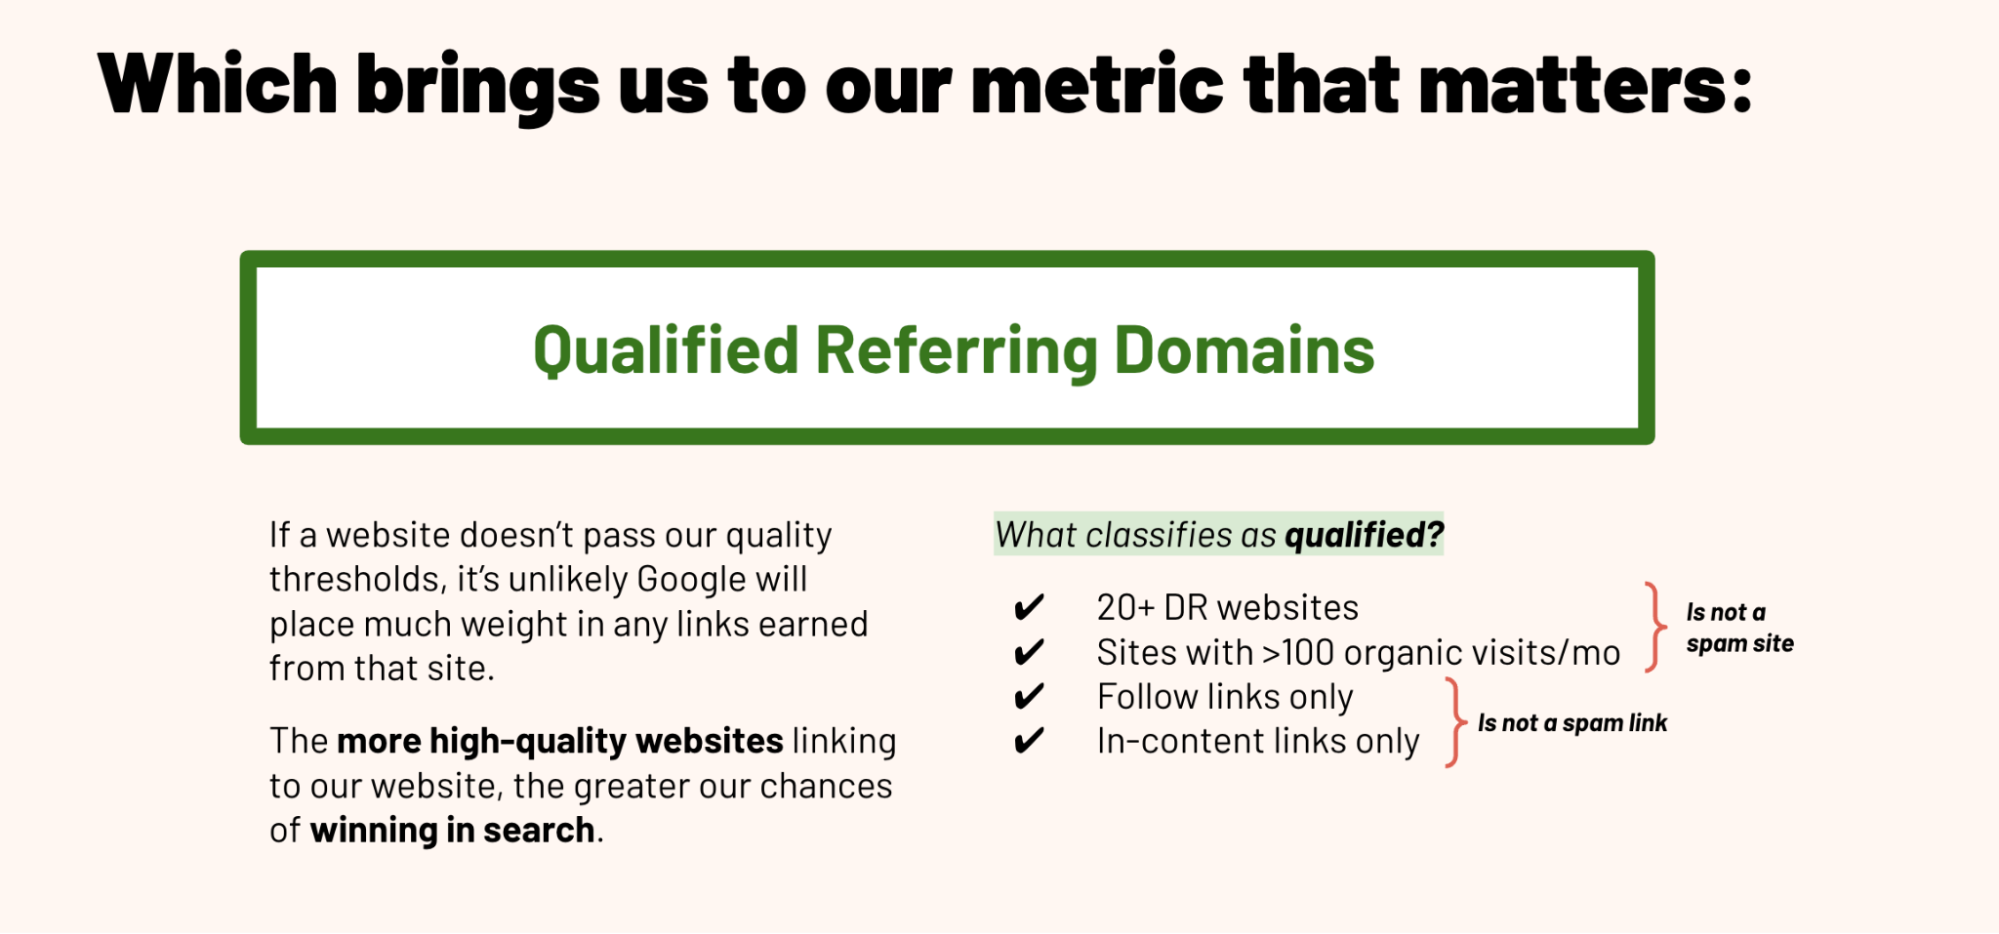 Image showing what classifies as a qualified referring domain